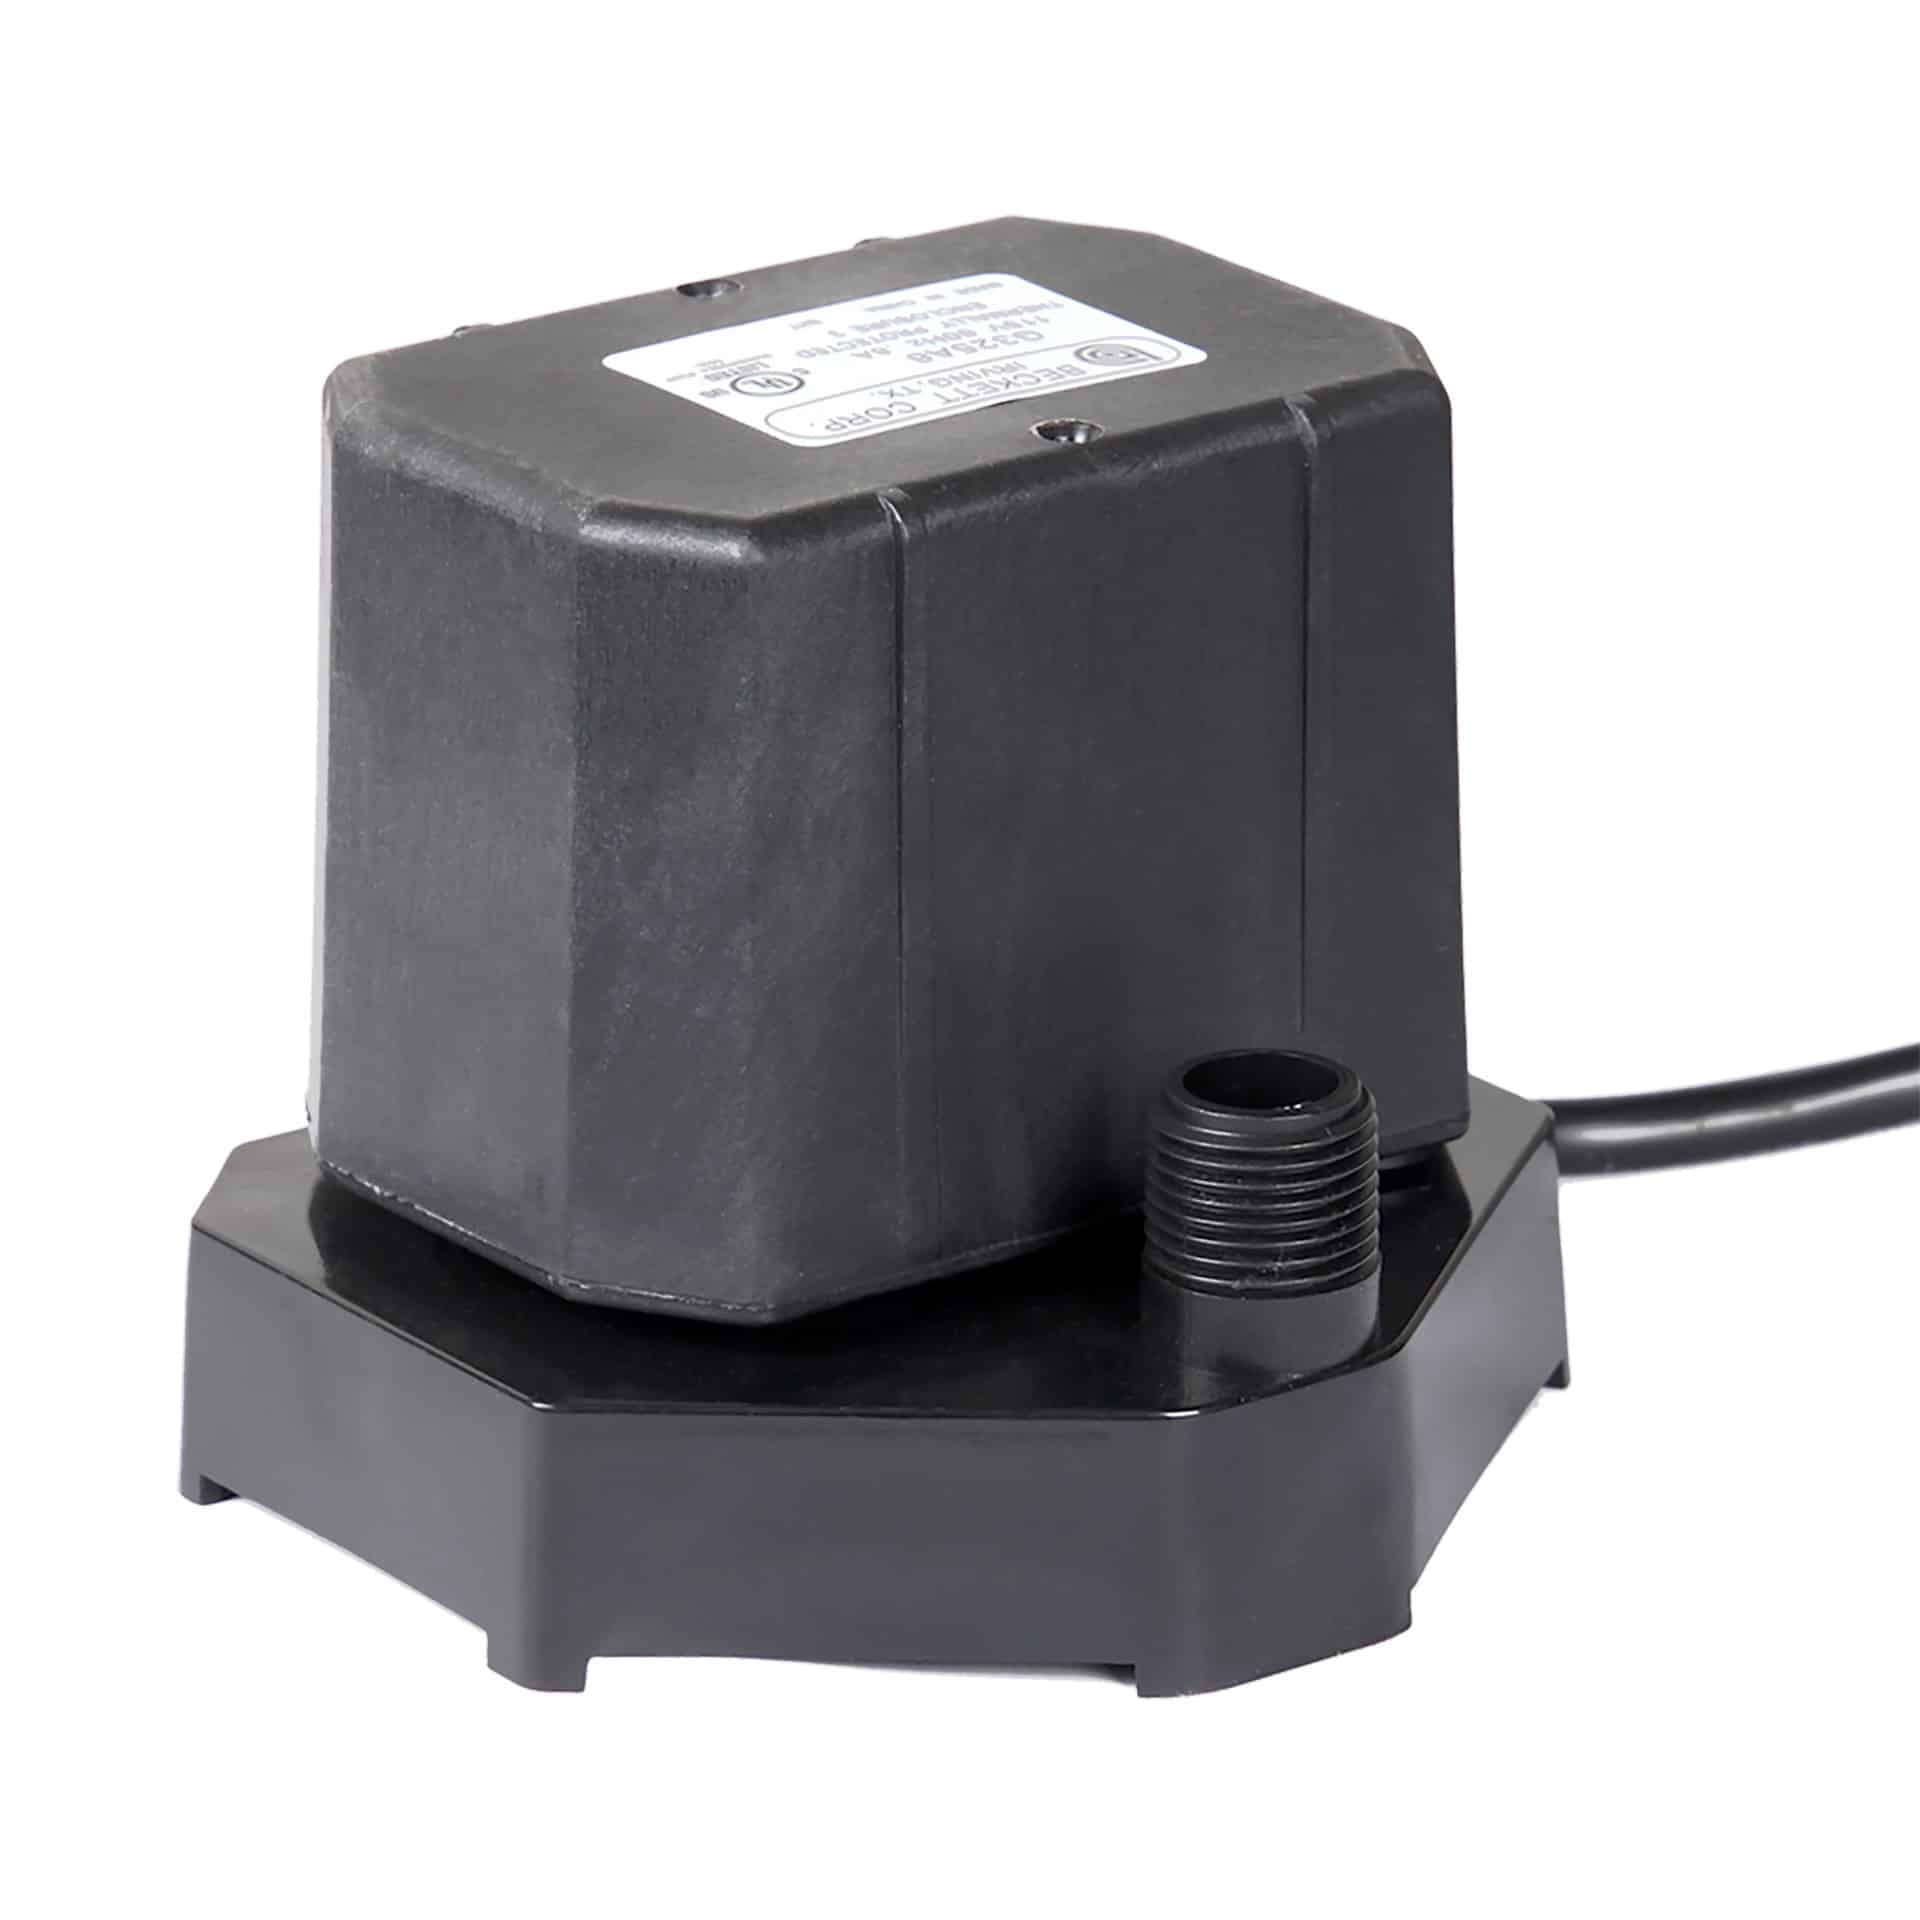 G325A6 – Submersible Pump with Bottom Intake, 115V, 425 GPH, 6 Ft Power Cord